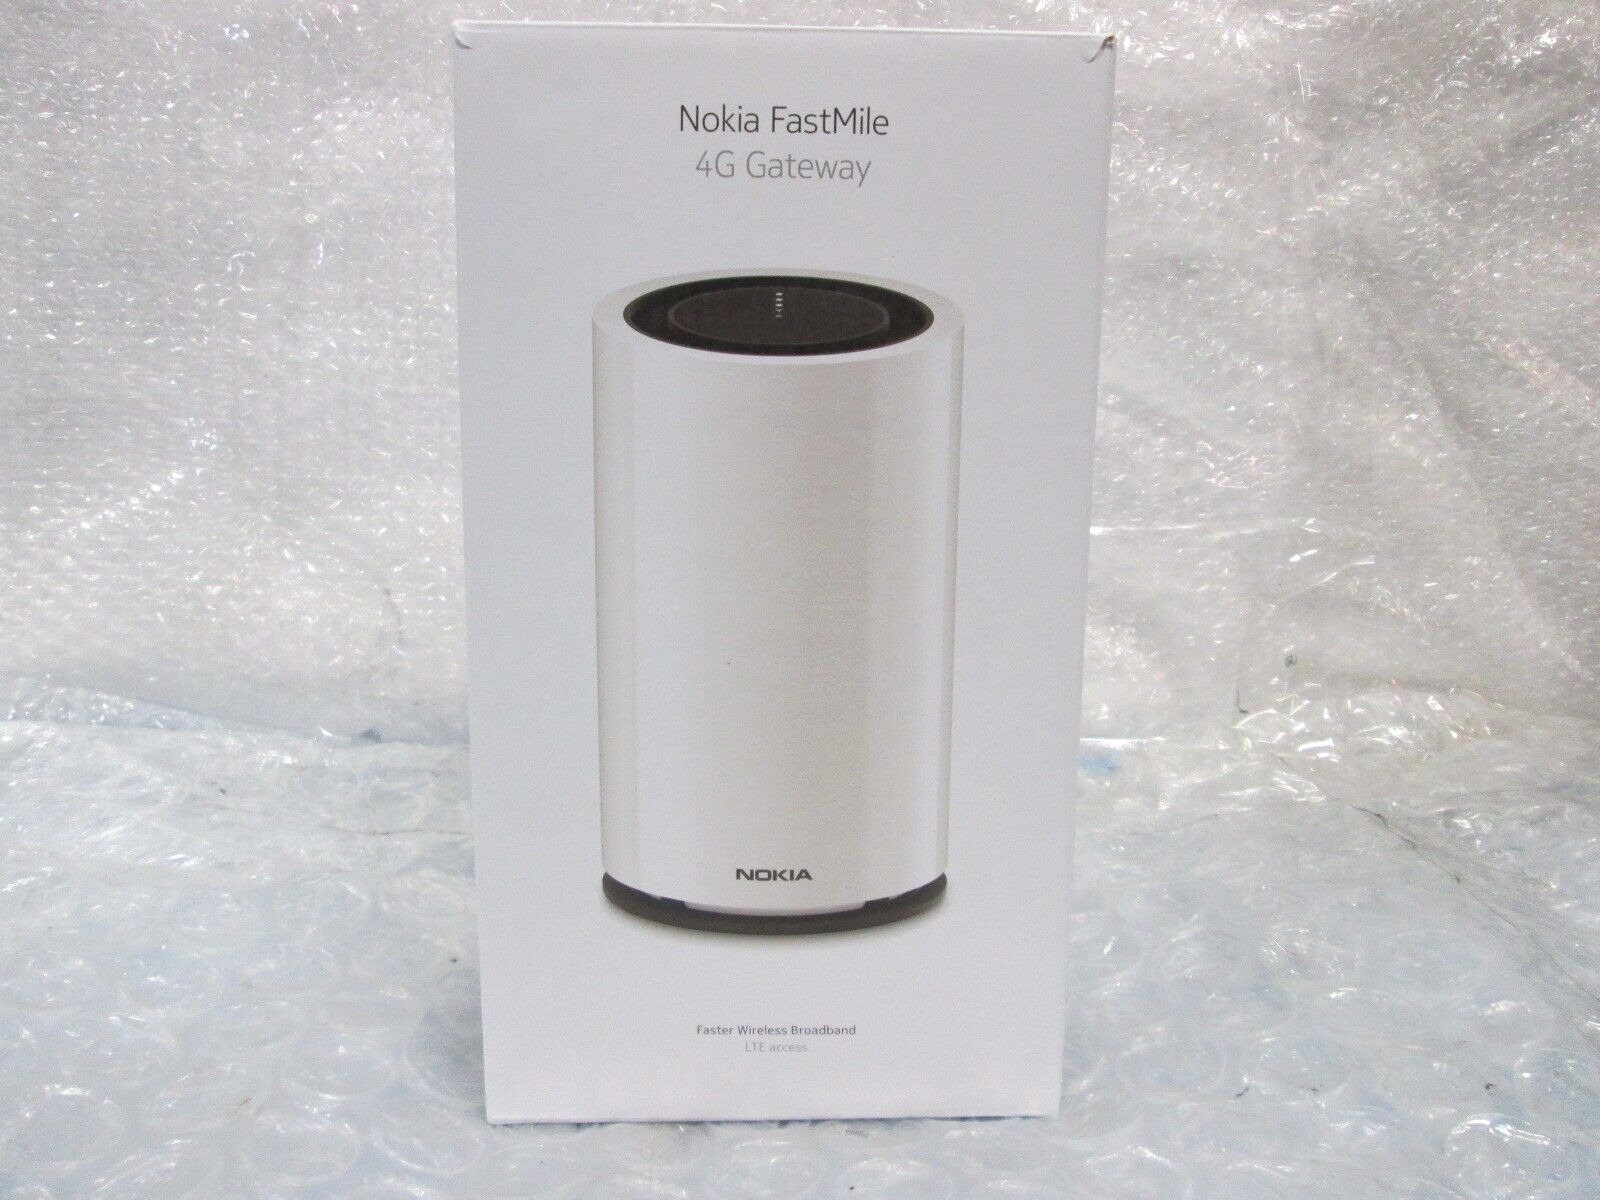 Nokia FastMile 4G Gateway 1 Faster Wireless Broadband LTE 4G08-12W-A Router.